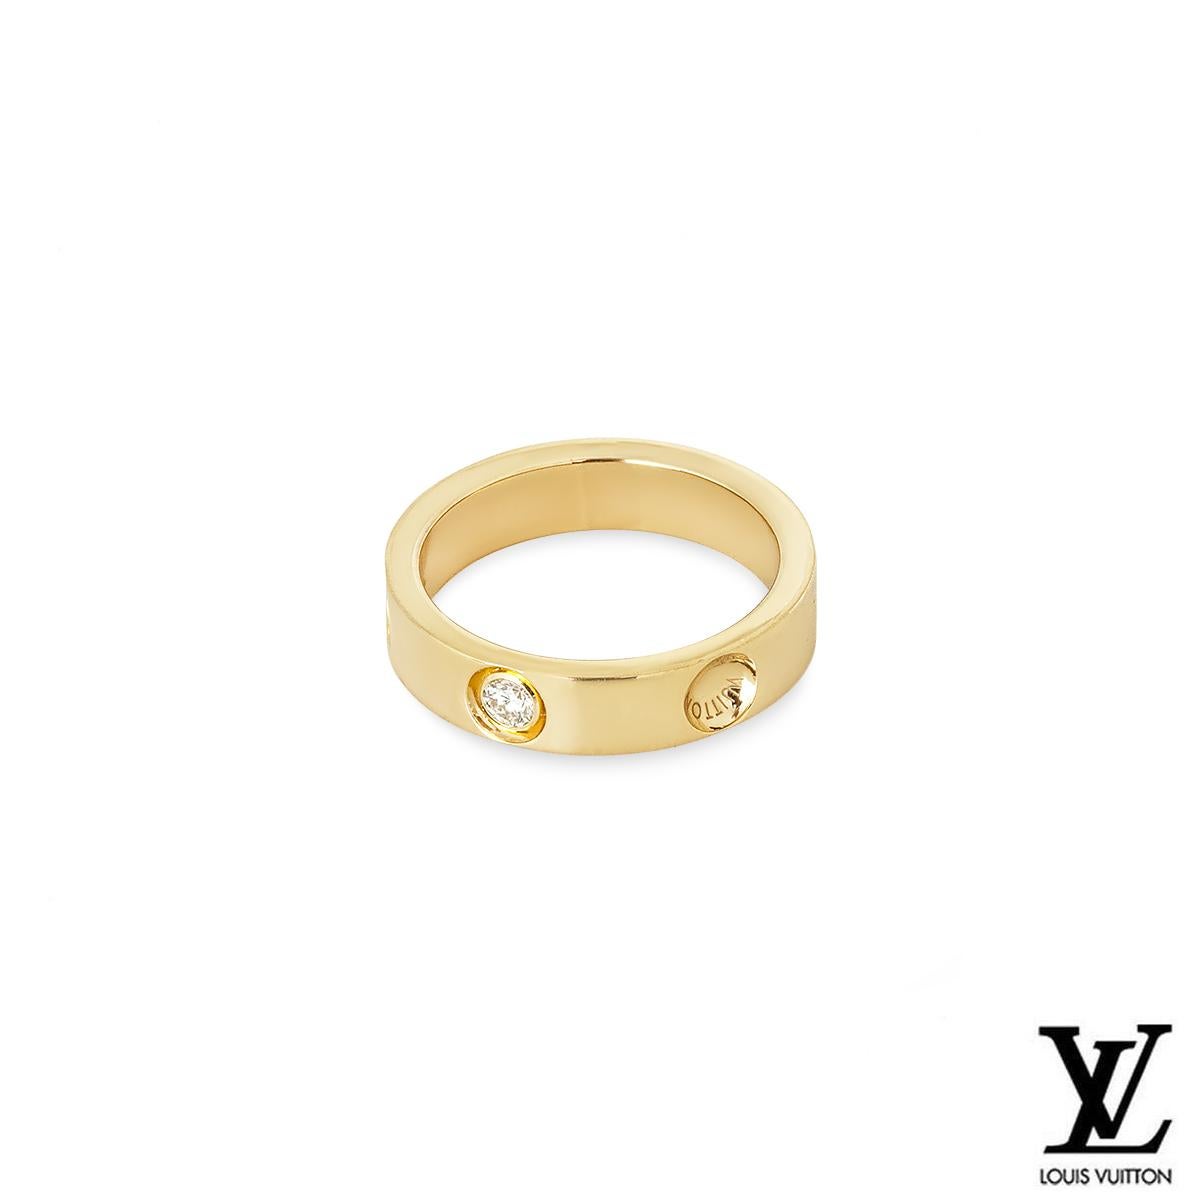 Louis Vuitton Yellow Gold Diamond Empreinte Ring Size 56 In Excellent Condition For Sale In London, GB